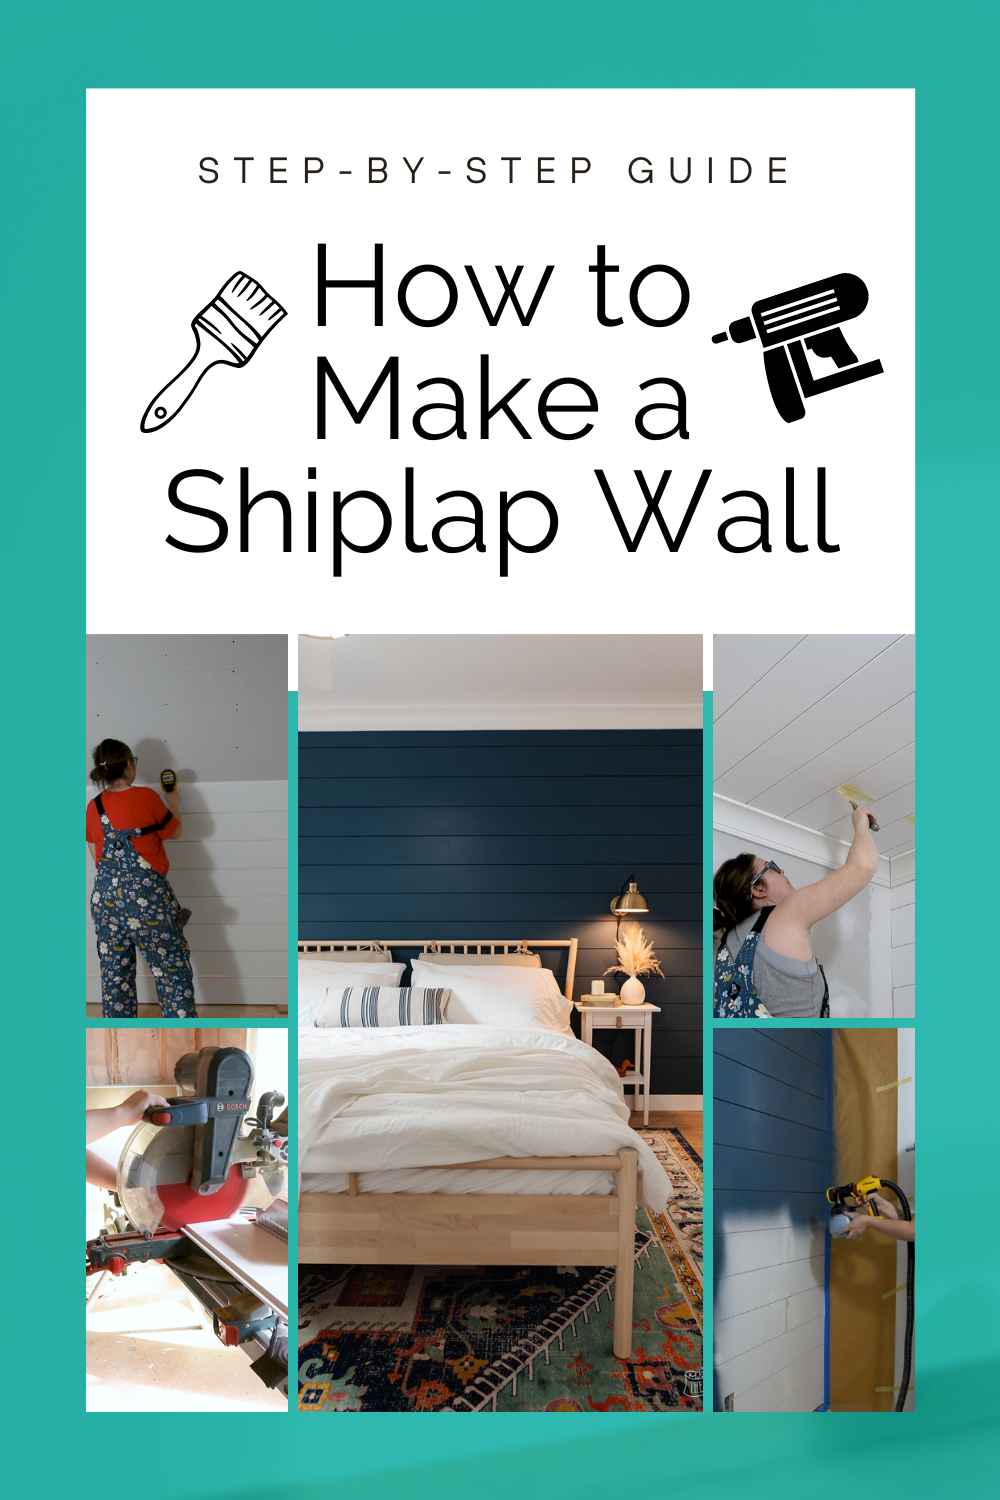 Step-by-step guide to installing a shiplap feature wall